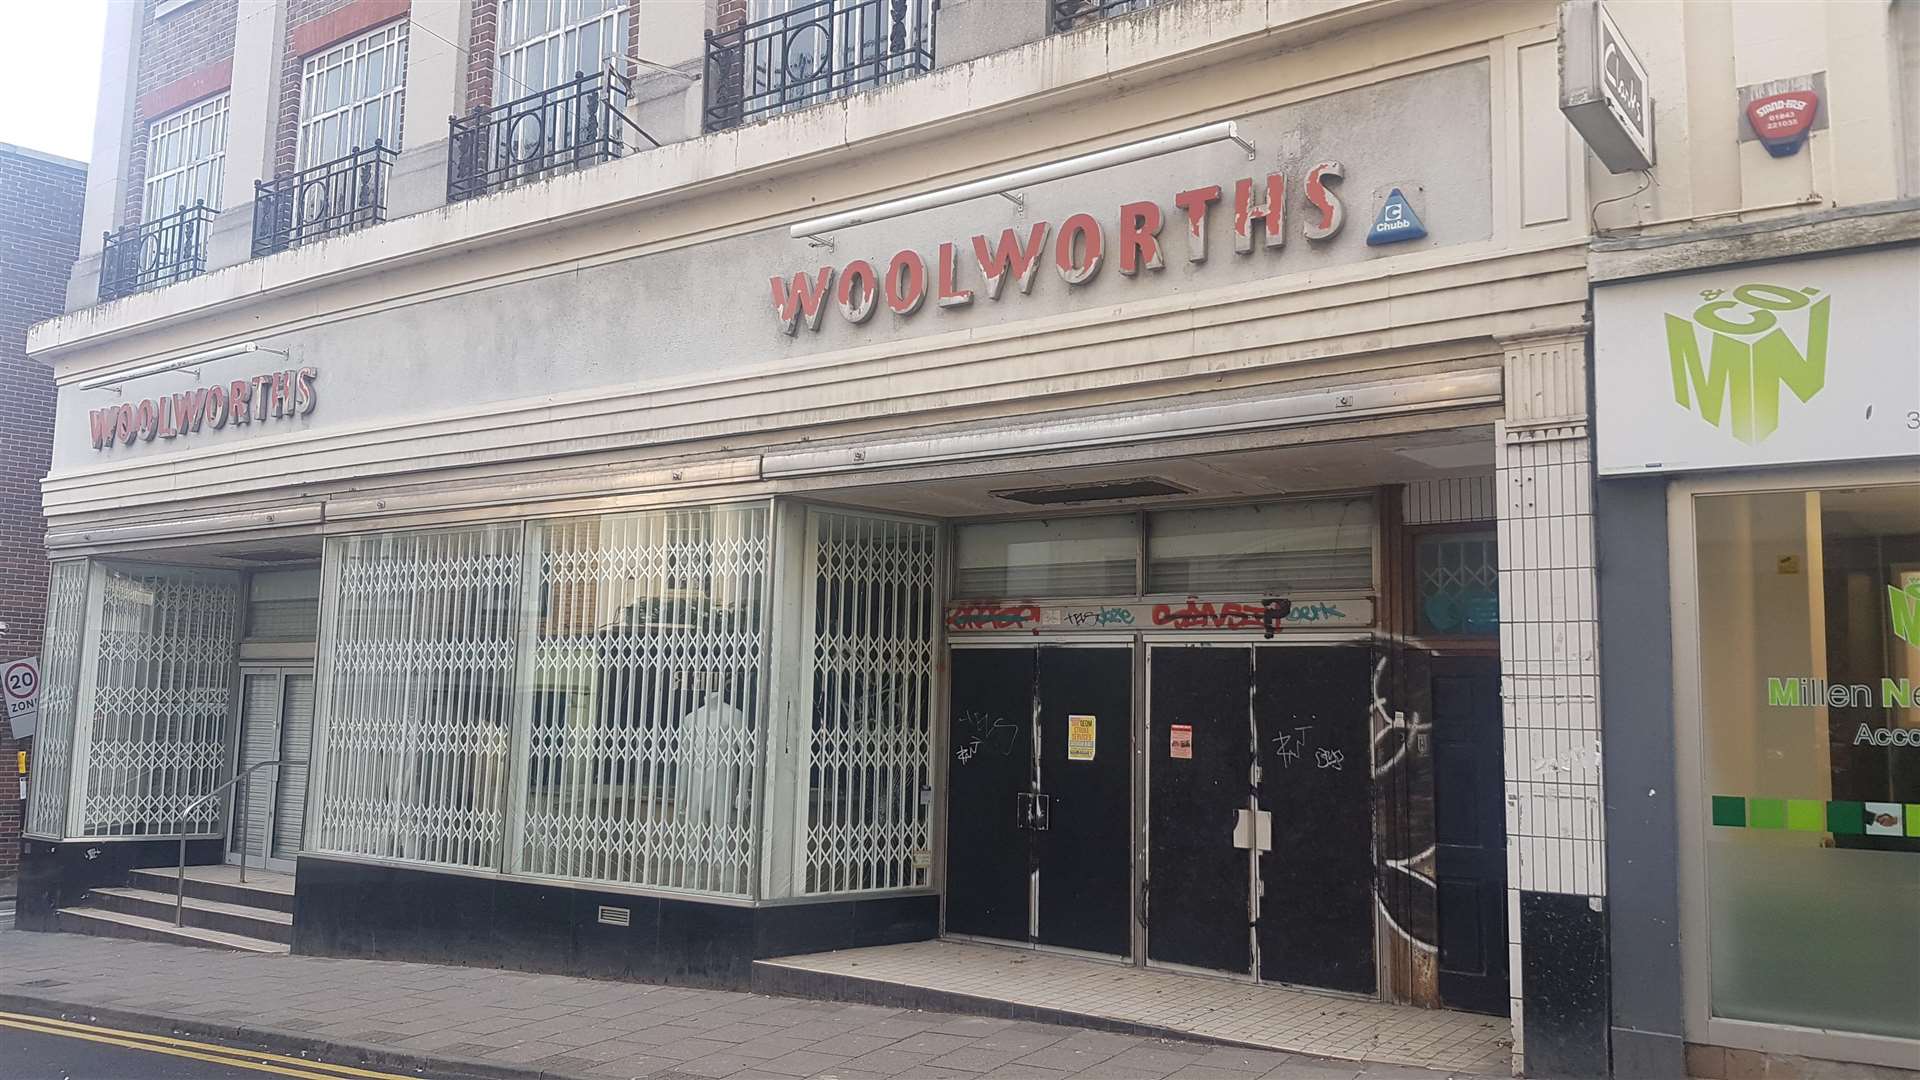 The Woolworths store in Margate closed 10 years ago (6328712)